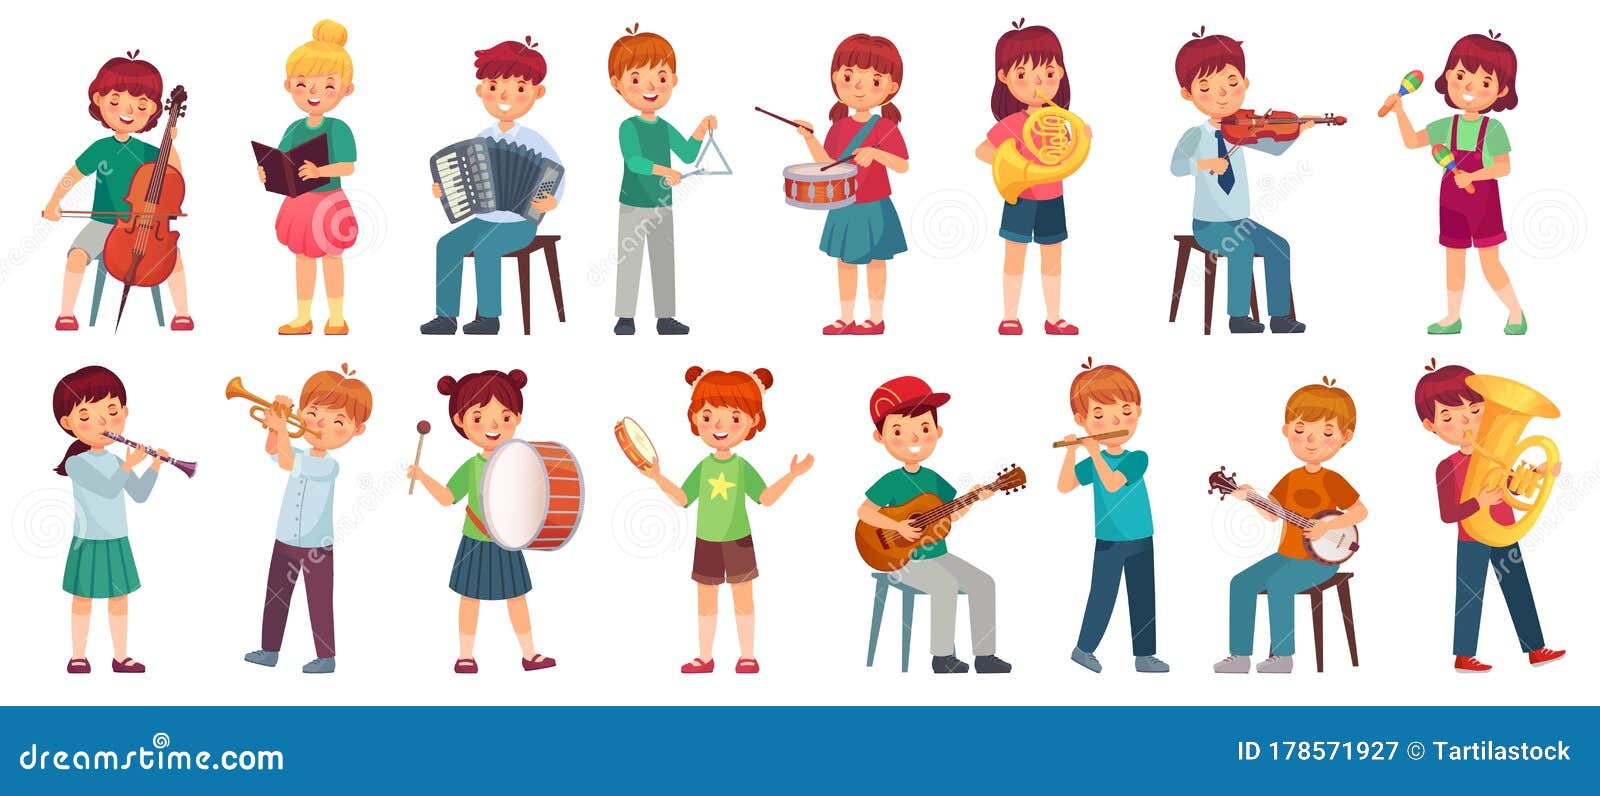 children orchestra play music. child playing ukulele guitar, girl sing song and play drum. kids musicians with music